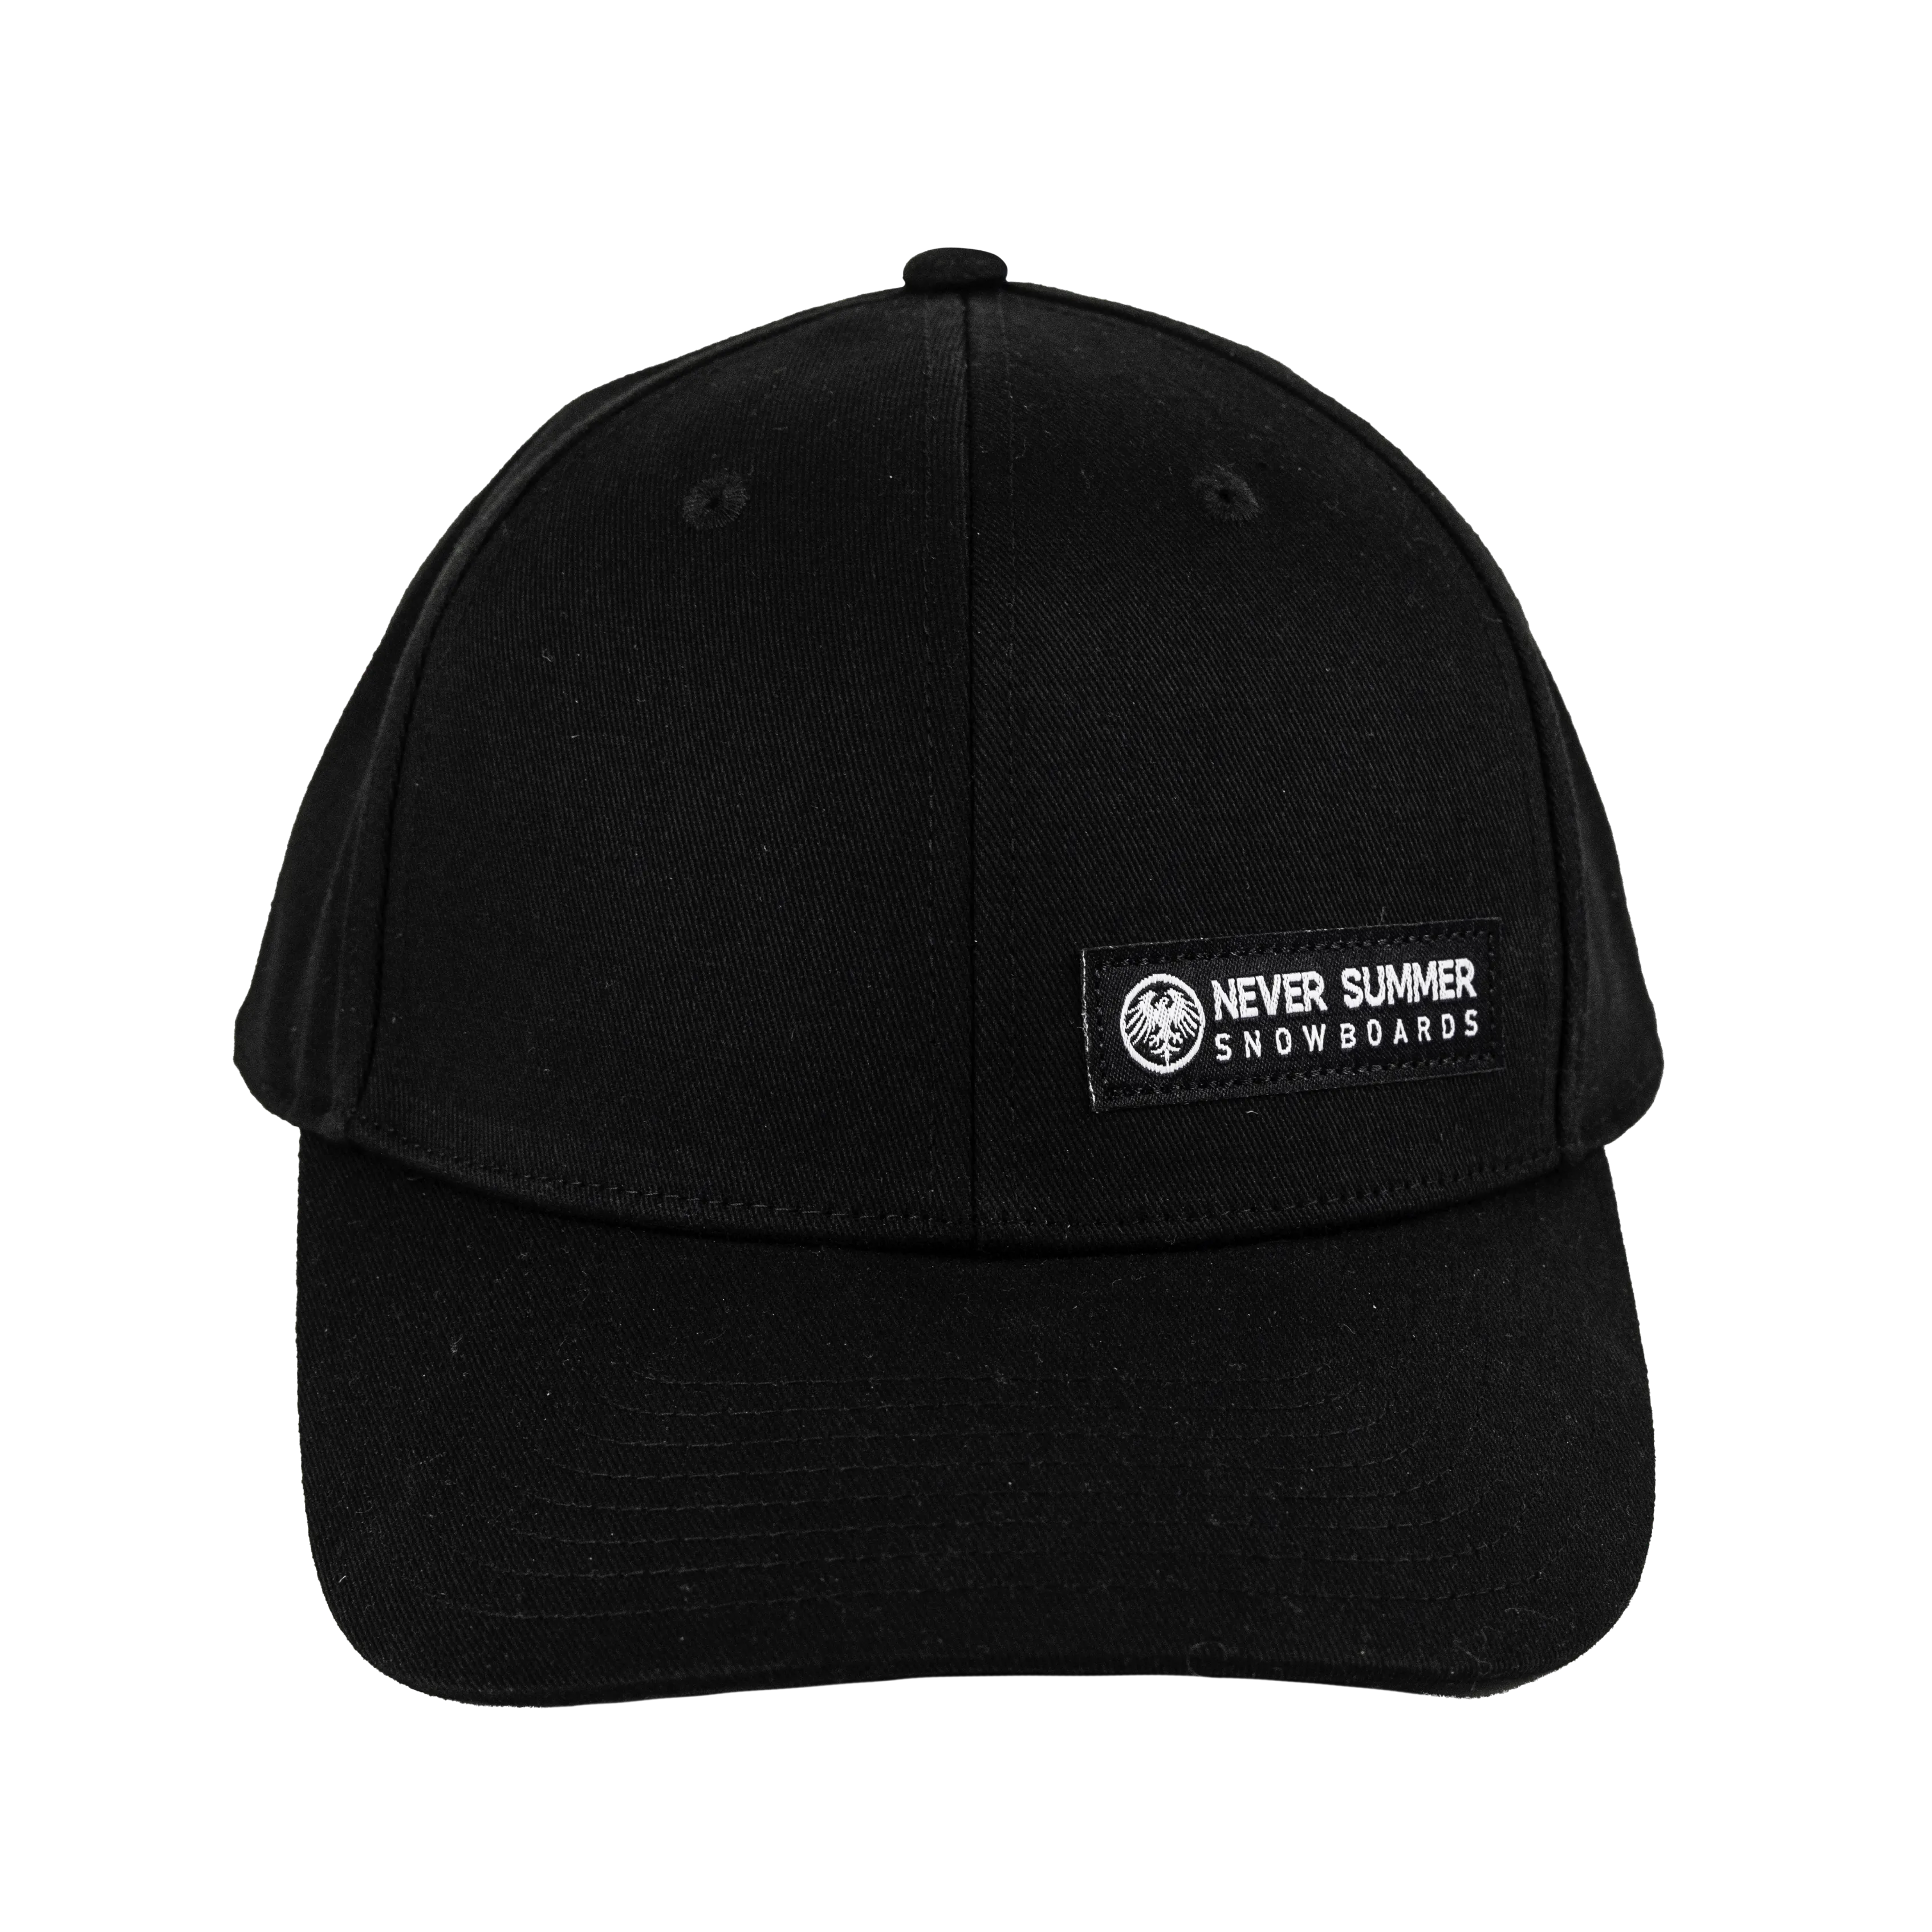 Never Snowboards | Stealth Corporate Summer Hat